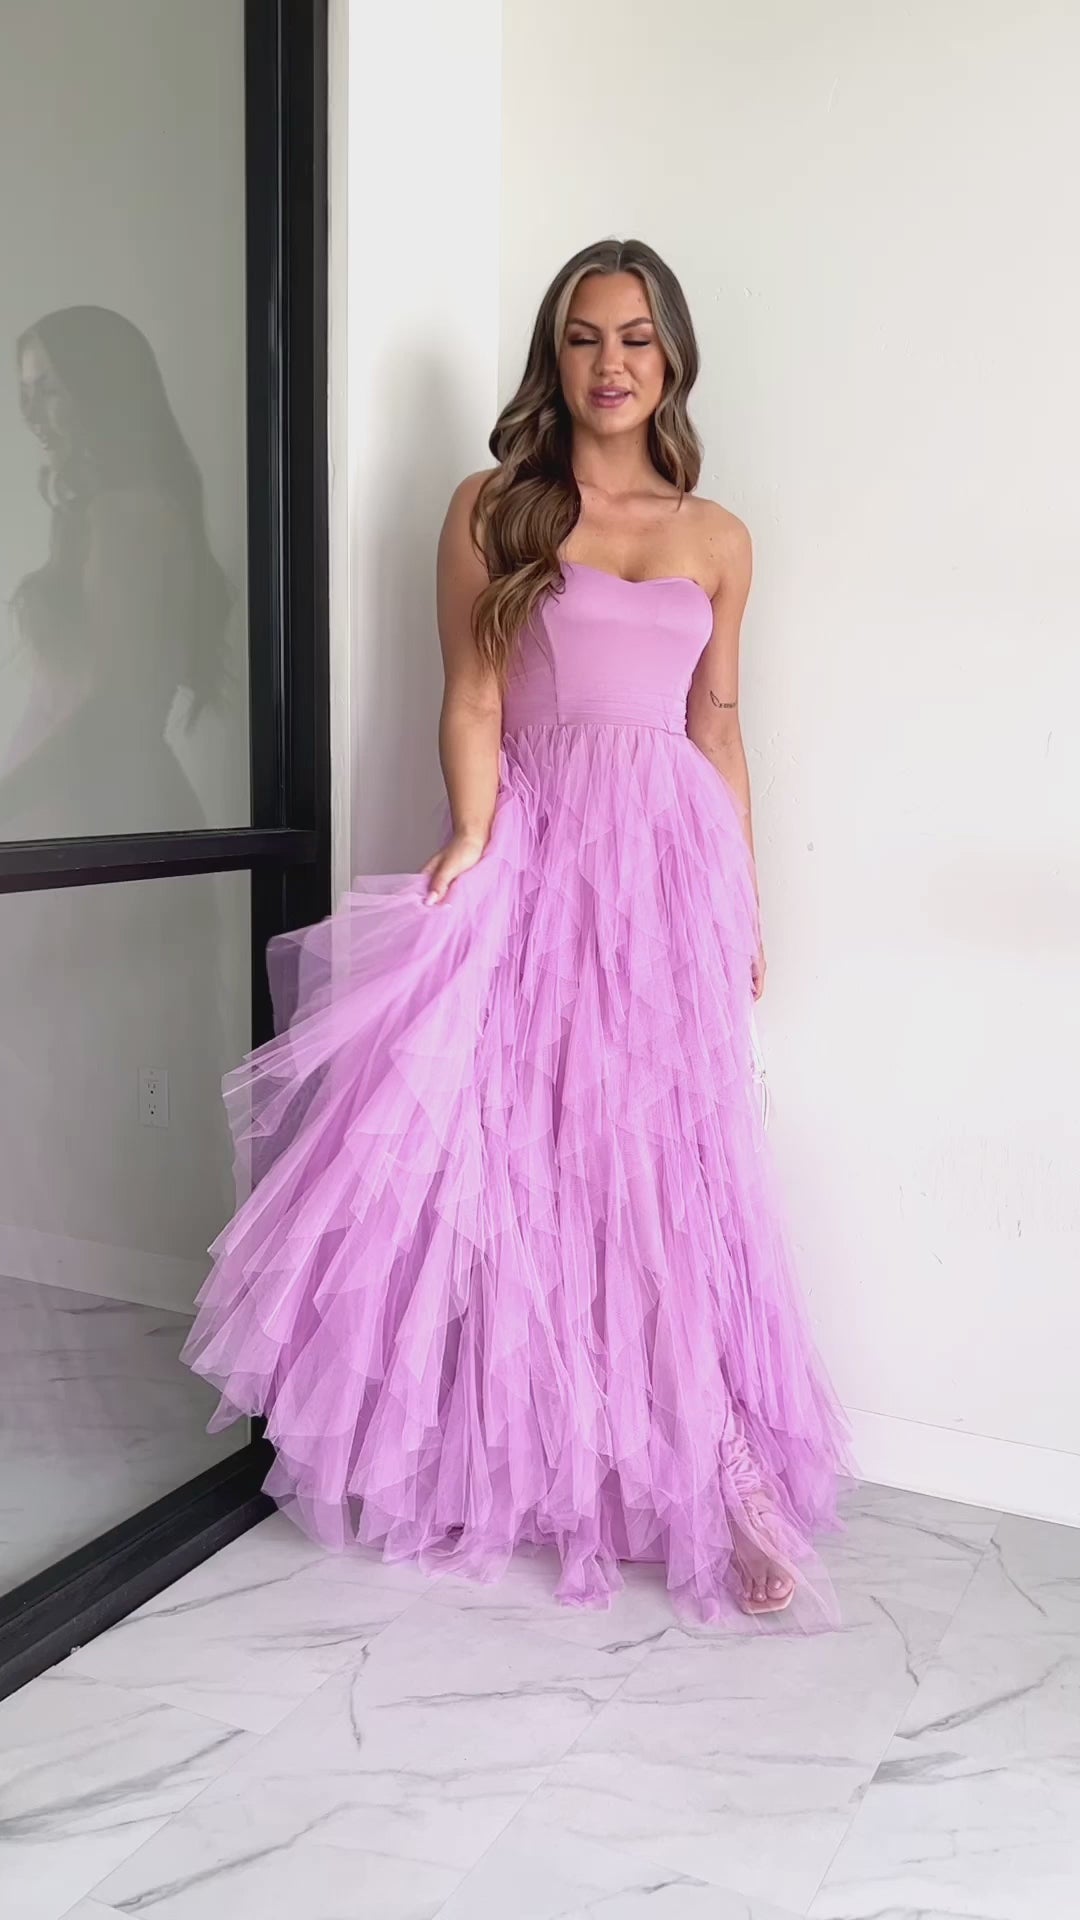 Gala Goals Strapless Tulle Maxi Dress (Orchid)